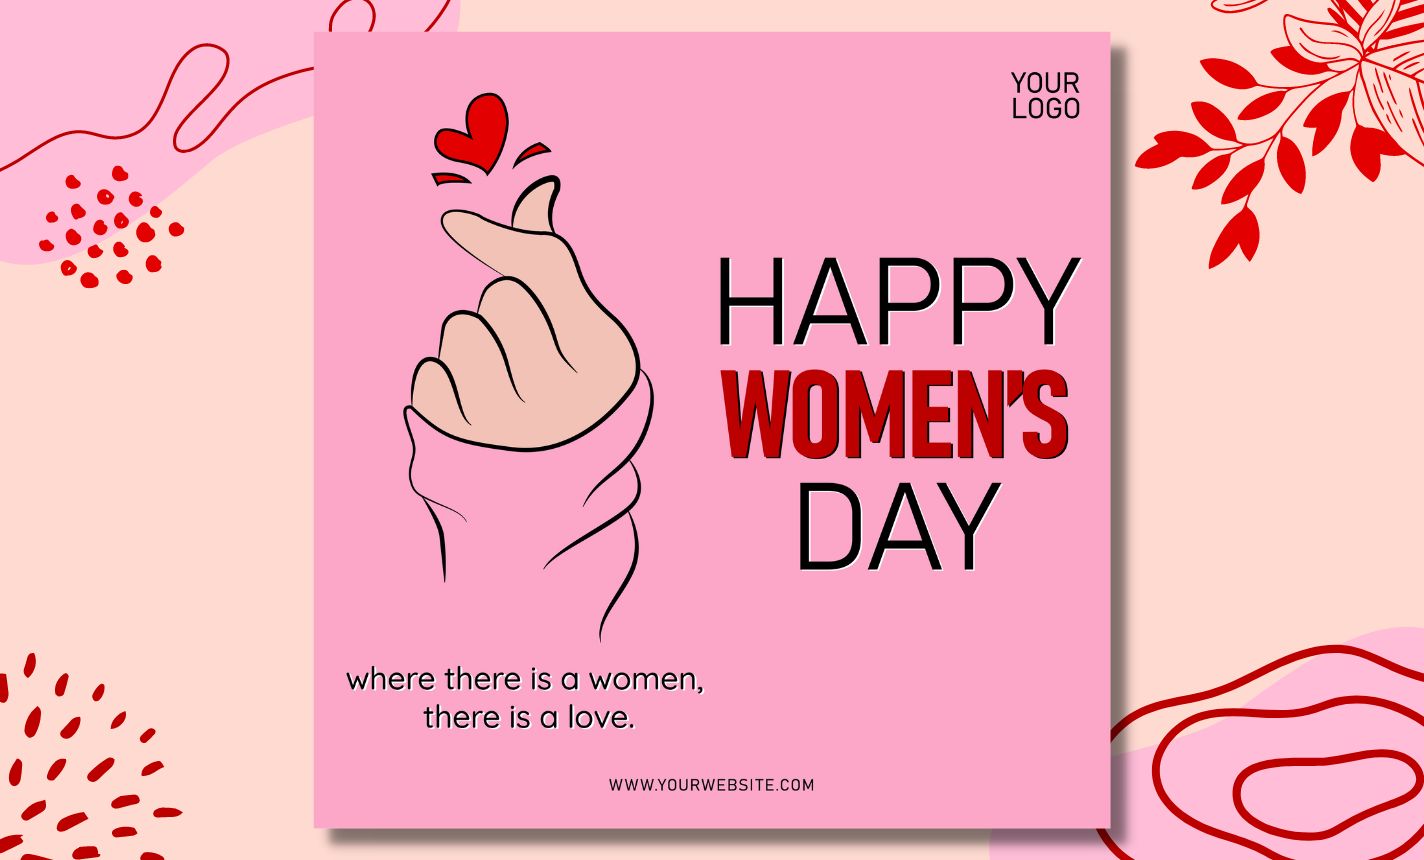 Woman's day card with a hand holding a heart.